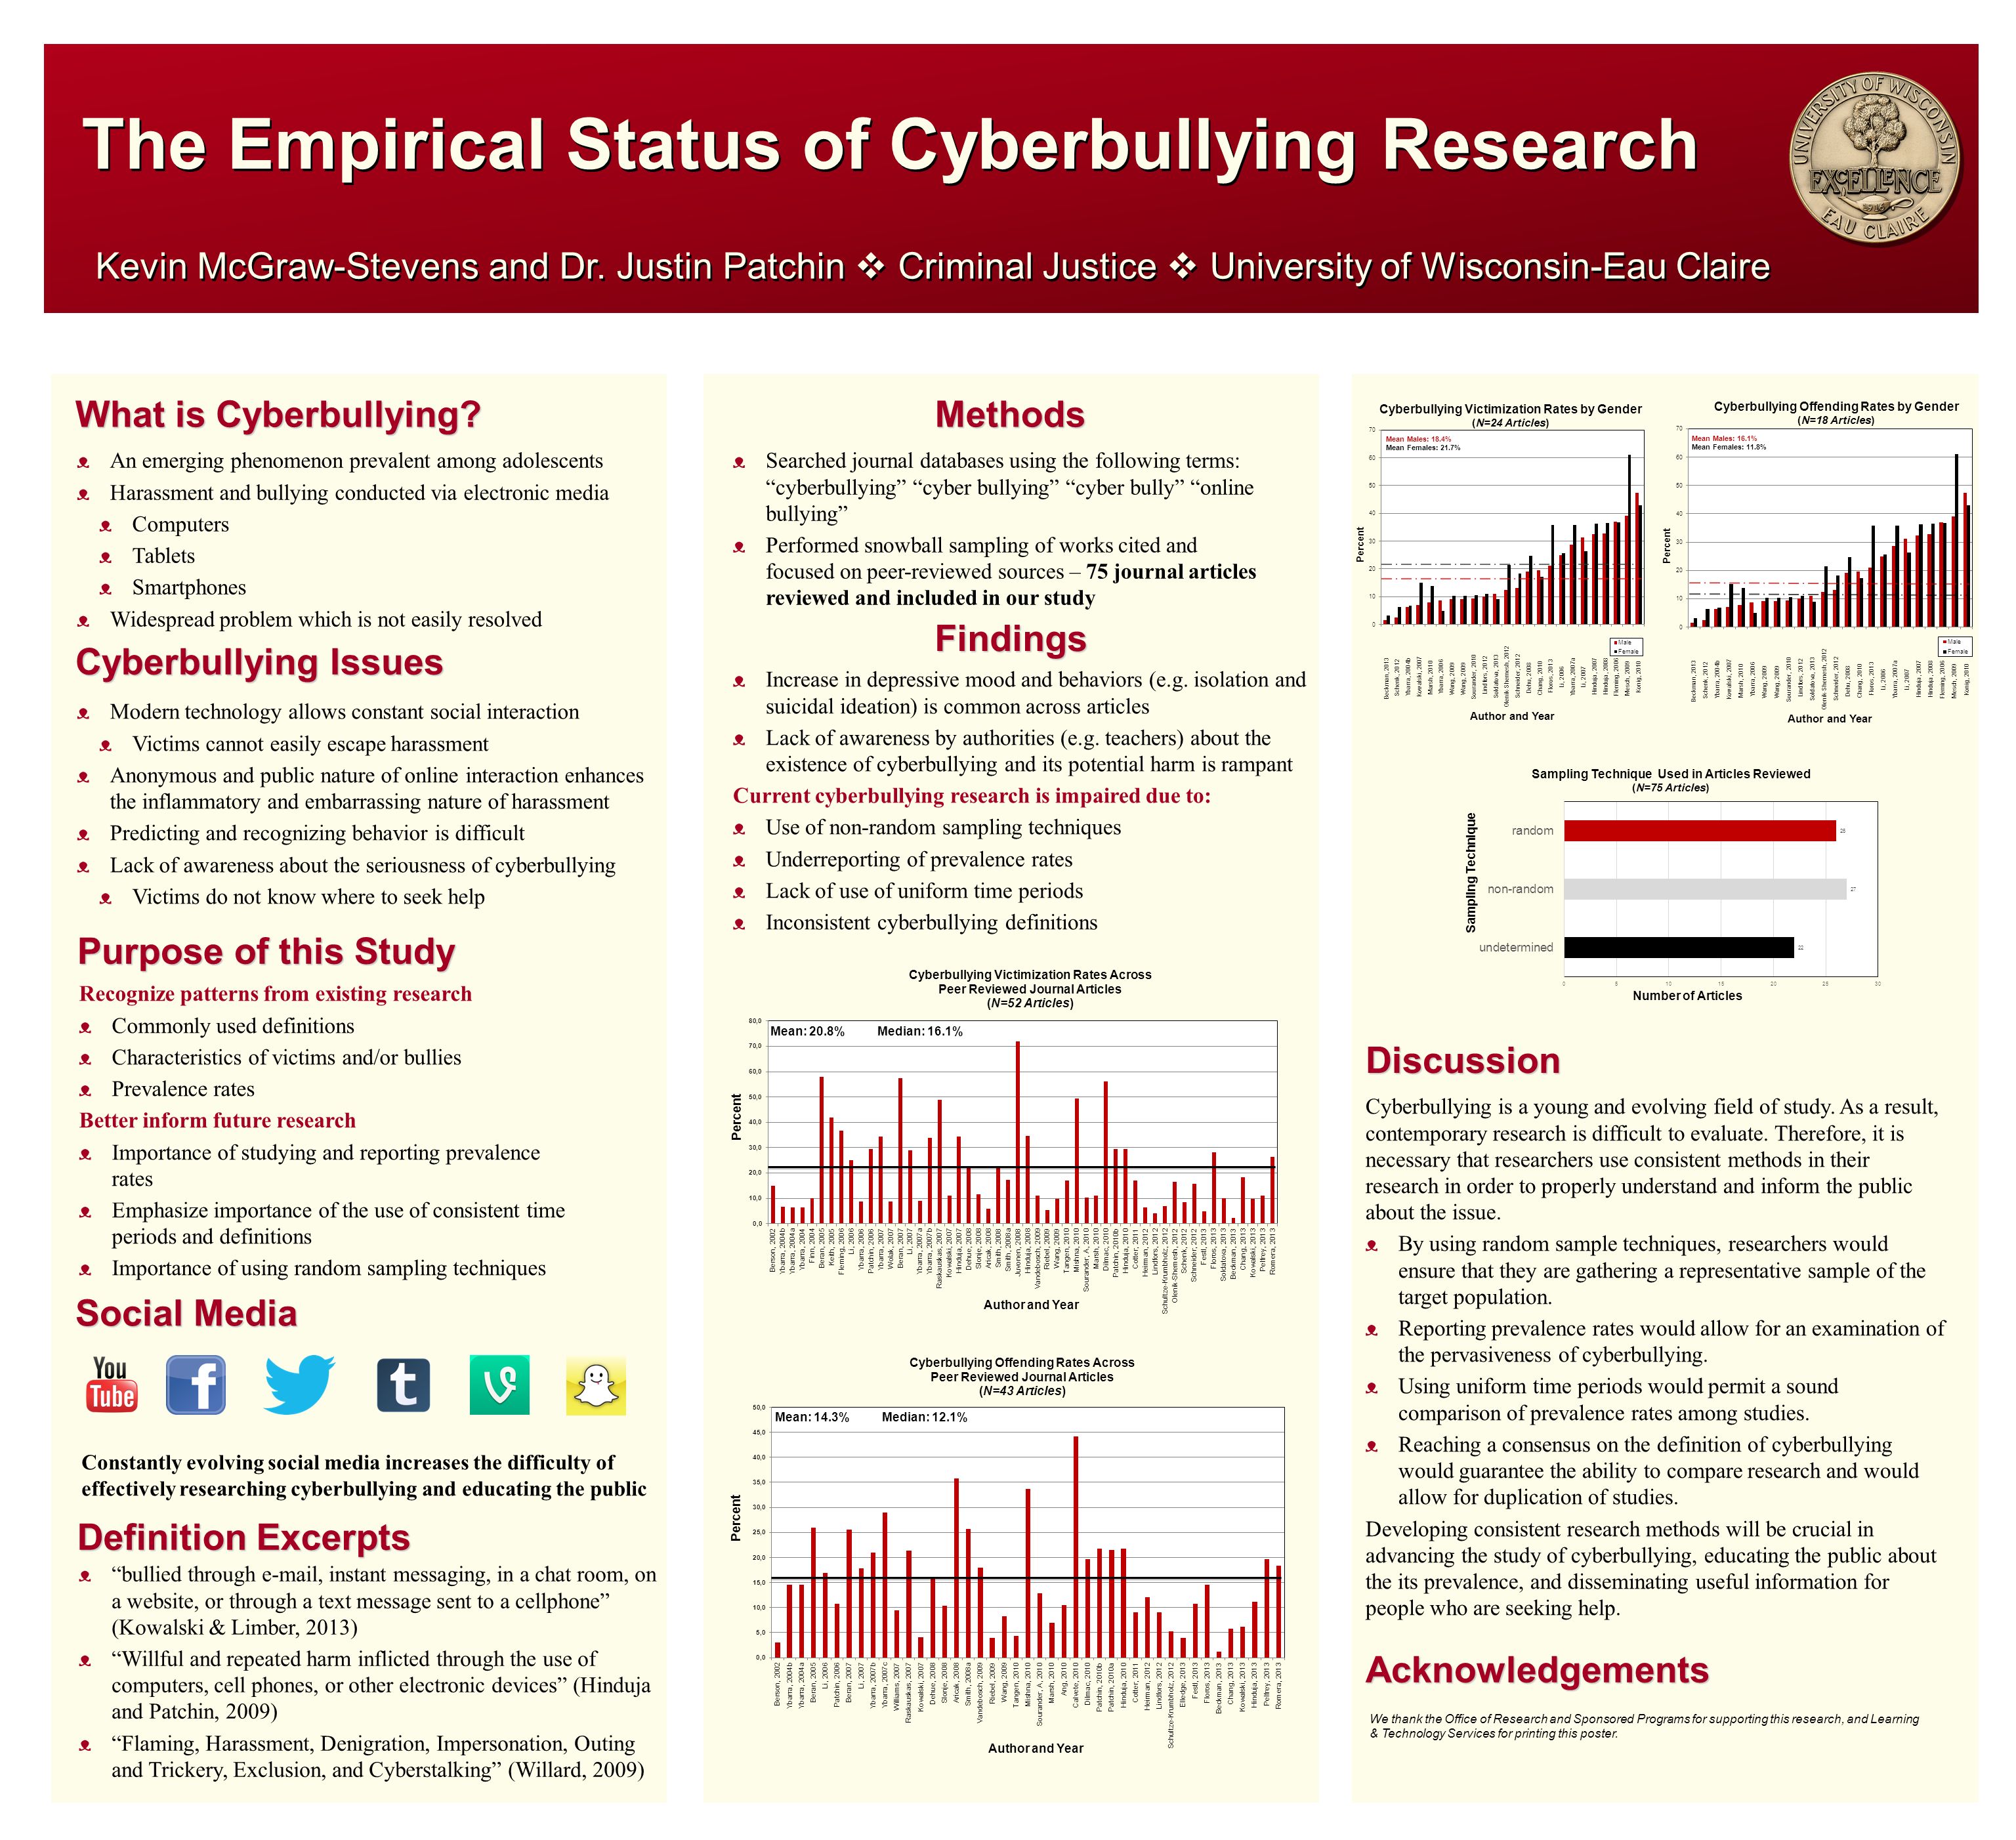 cyberbullying issues social media what is cyberbullying? definition